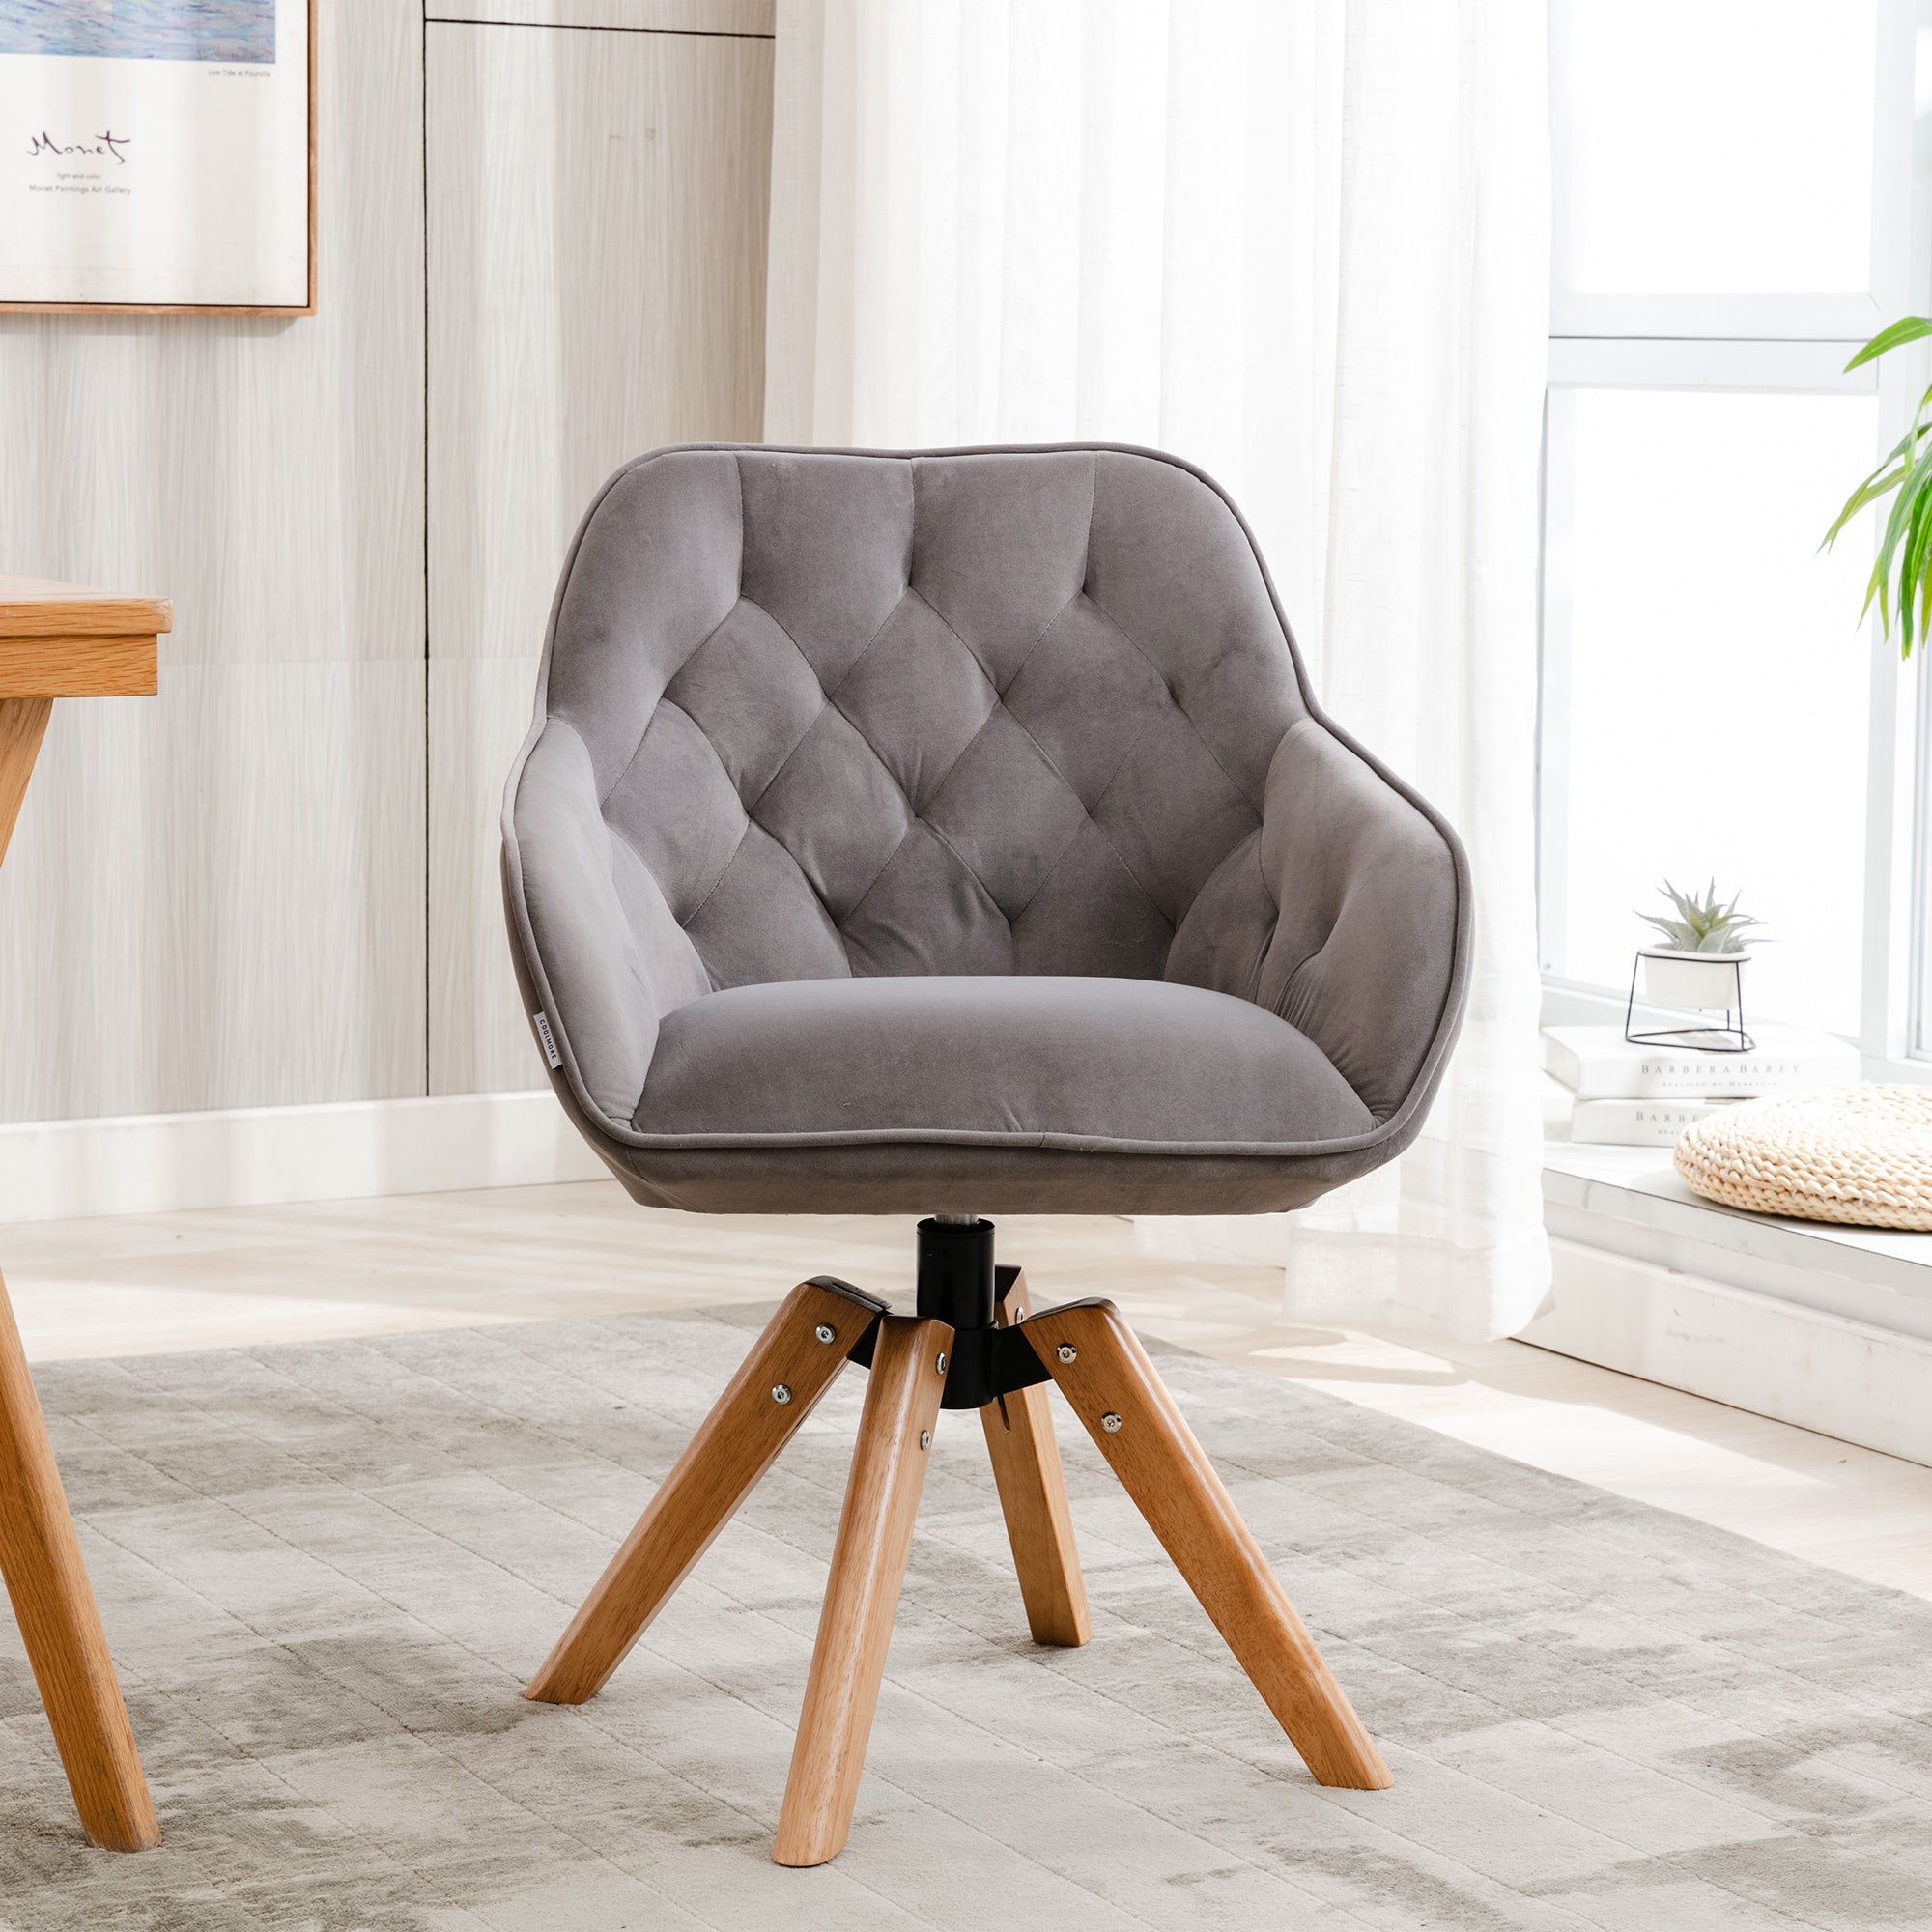 COOLMORE Solid Wood Tufted Upholstered Office Chair